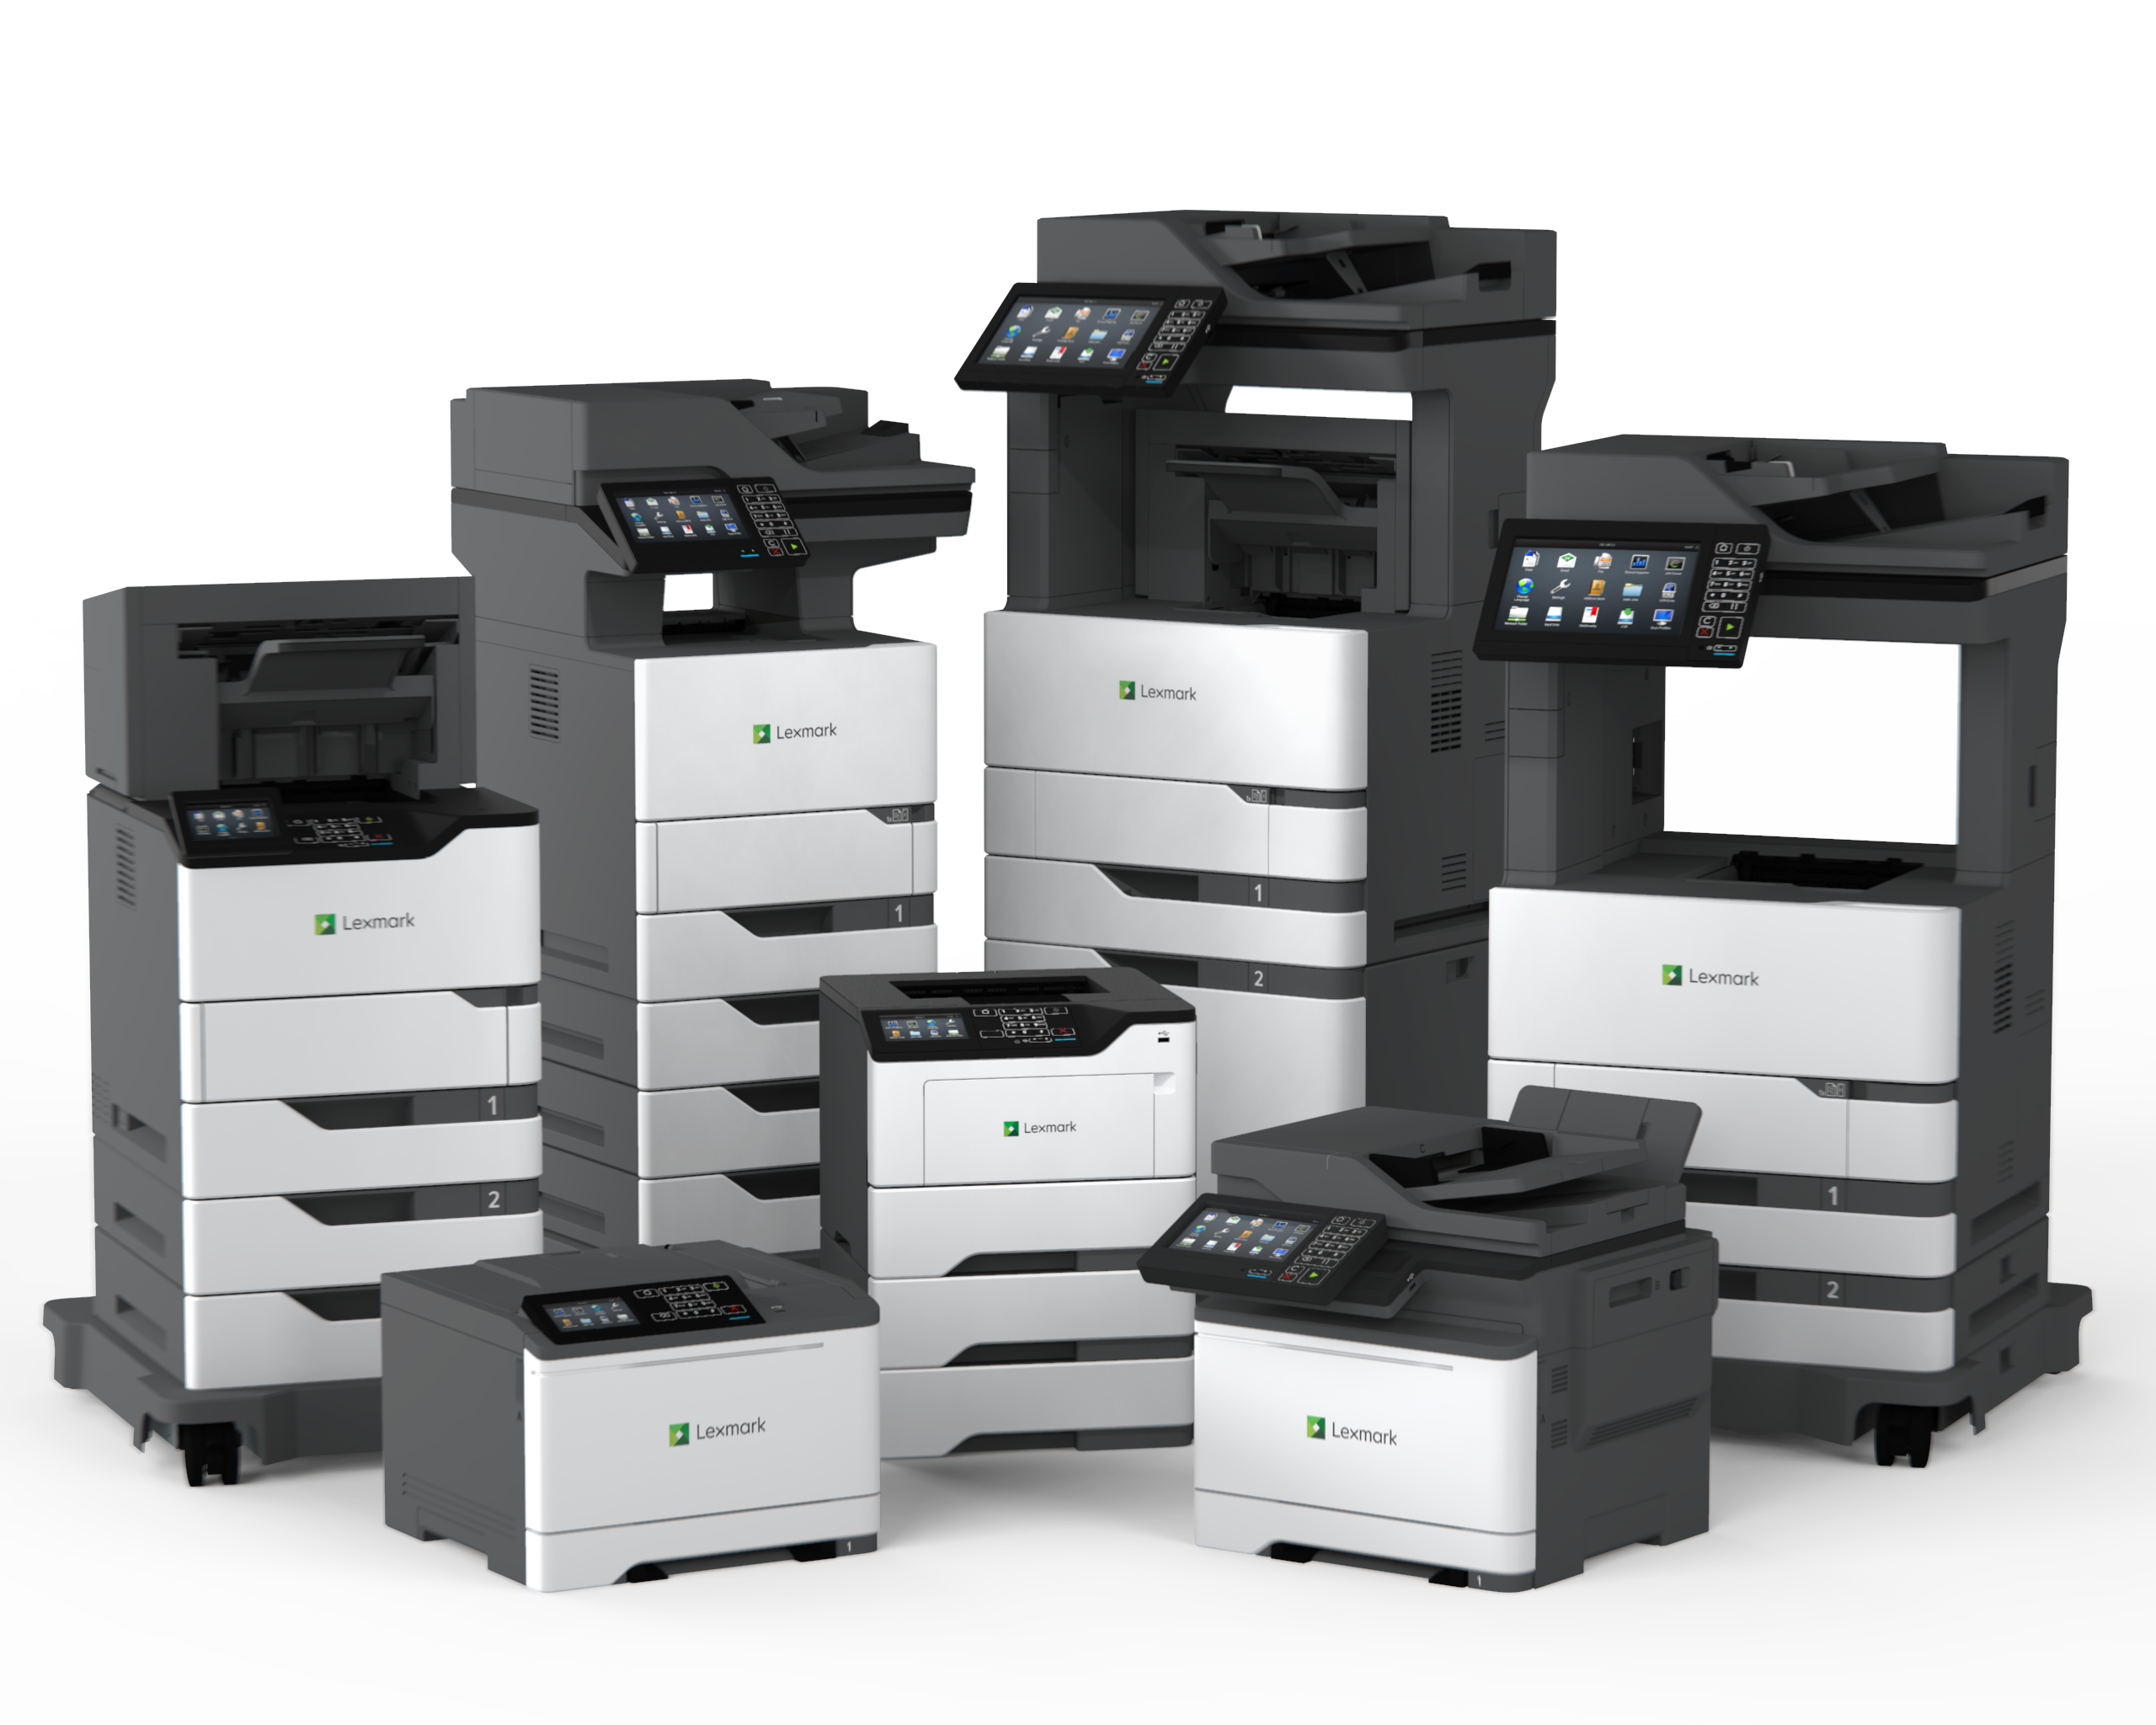 Group printer image for 2019 BLI Line of the Year